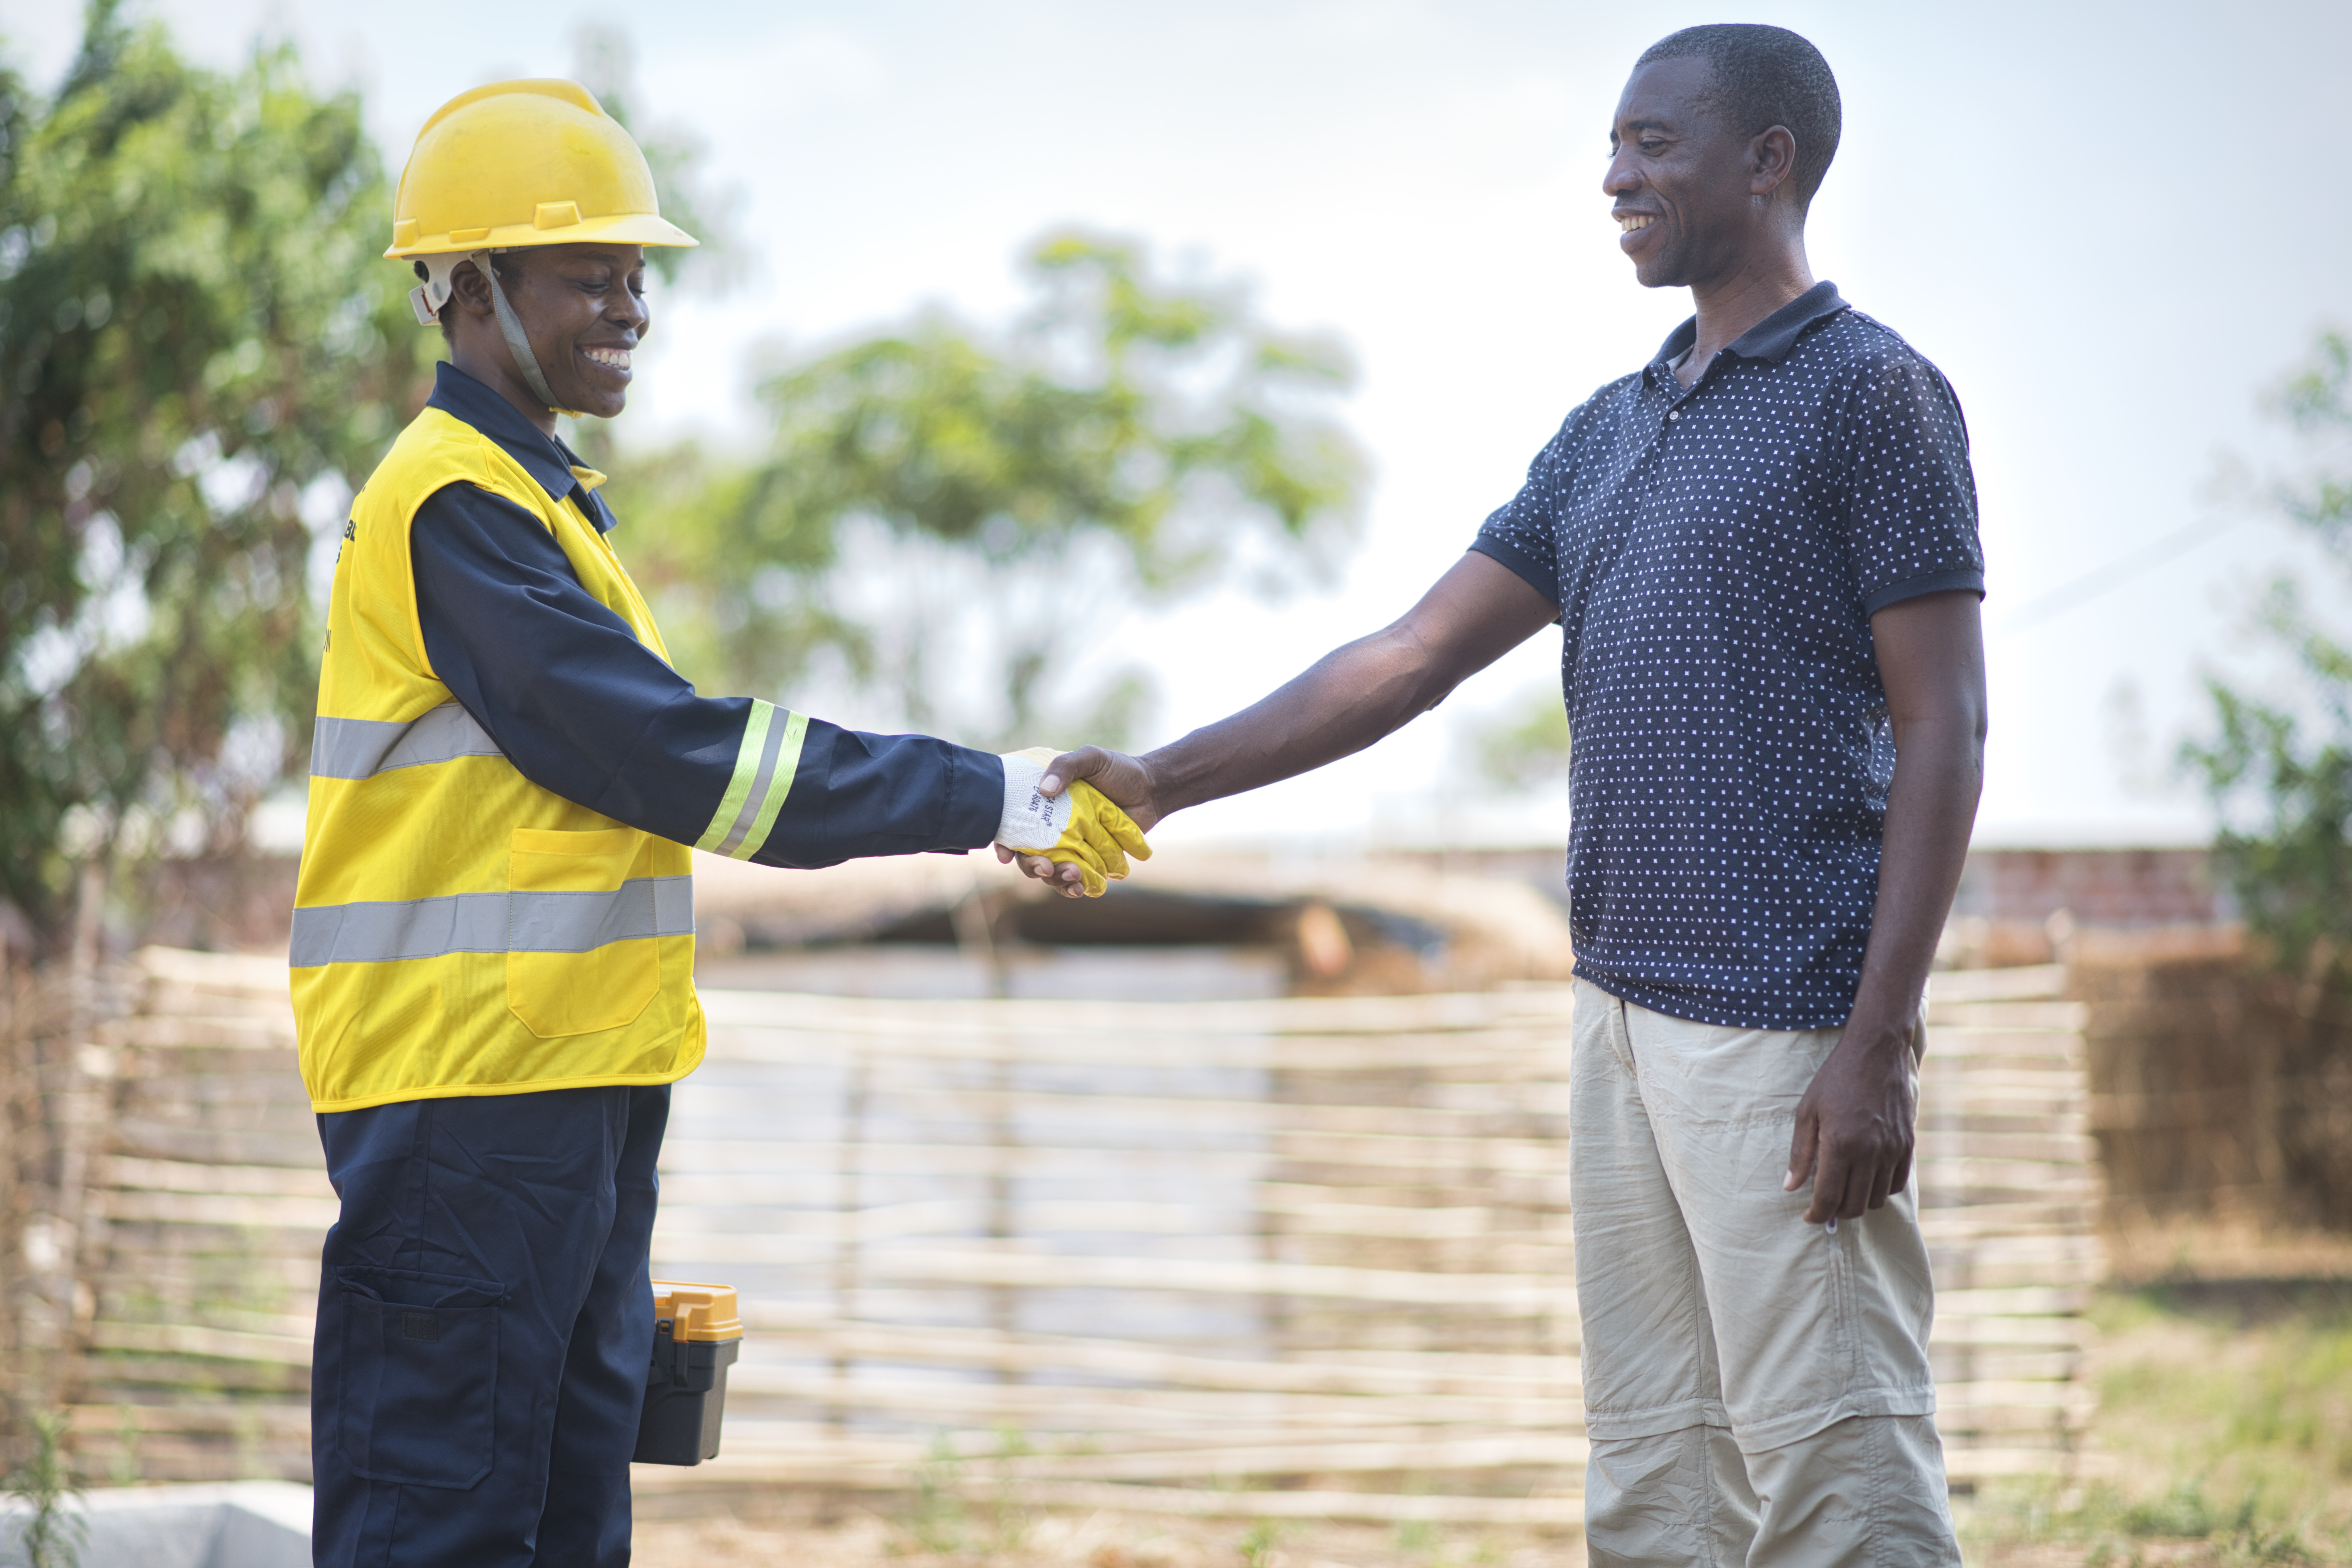 A solar inverter installer in a yellow backet shakes hand with a man in a blue shirt in a rural setting with trees in the background.